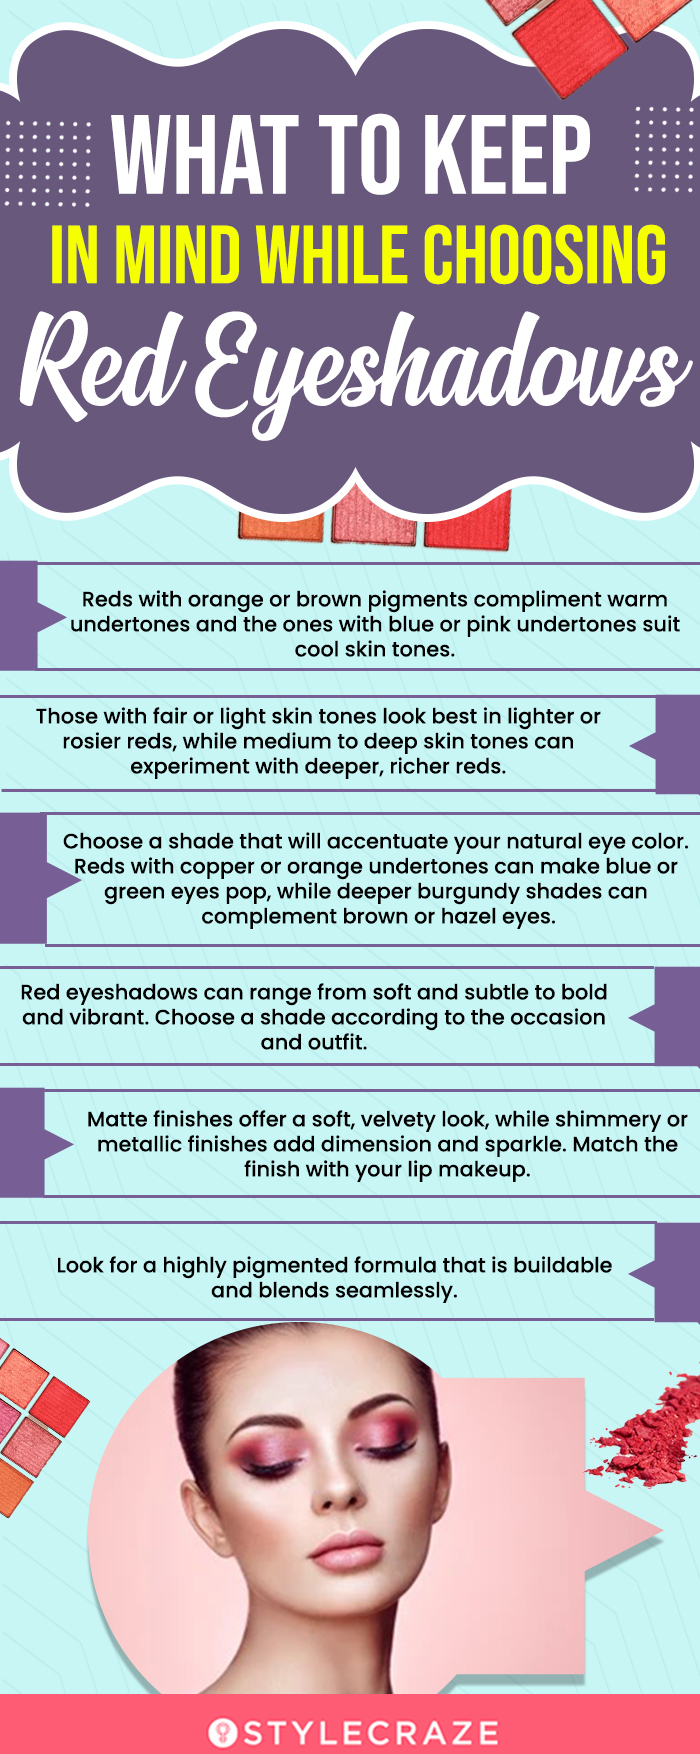 What To Keep In Mind While Choosing Red Eyeshadows (infographic)